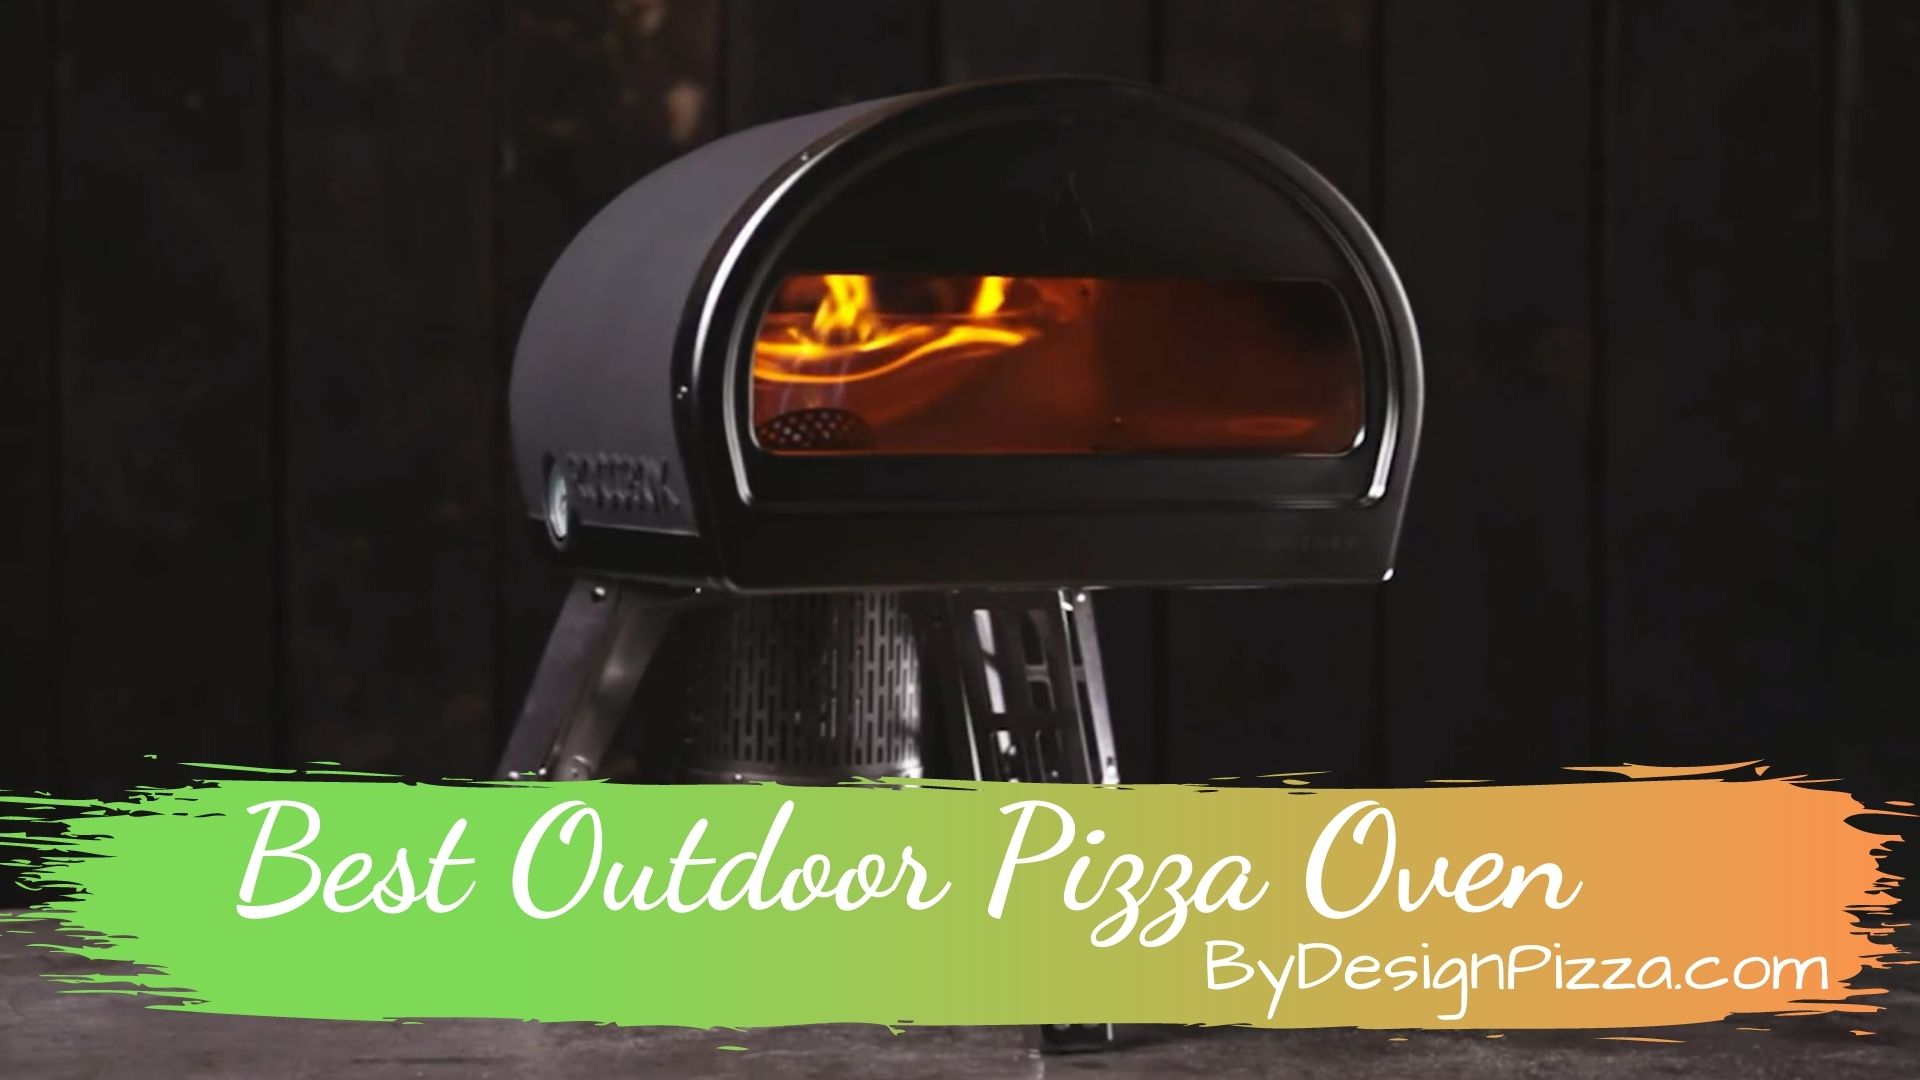 Roccbox Portable Wood and Gas Pizza Oven